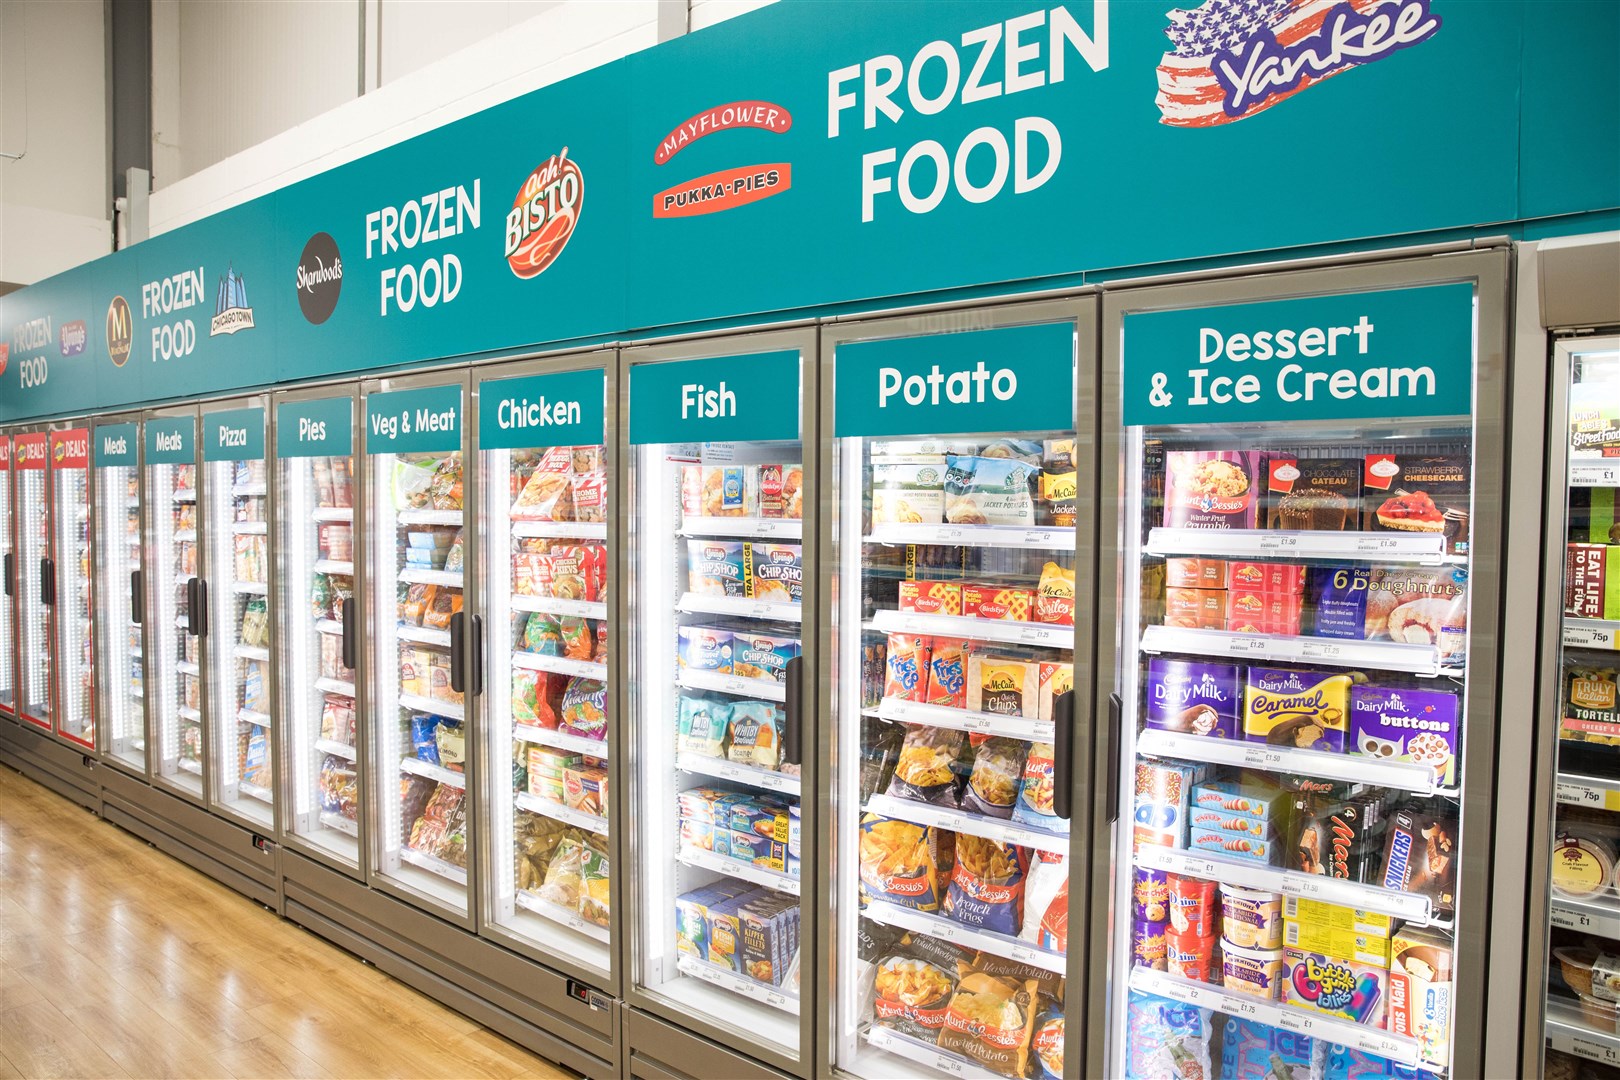 Poundland said it had seen a successful trial of five ‘shop-in-shops’ selling products ranging from luxury yogurts to frozen fish (Poundland/PA)